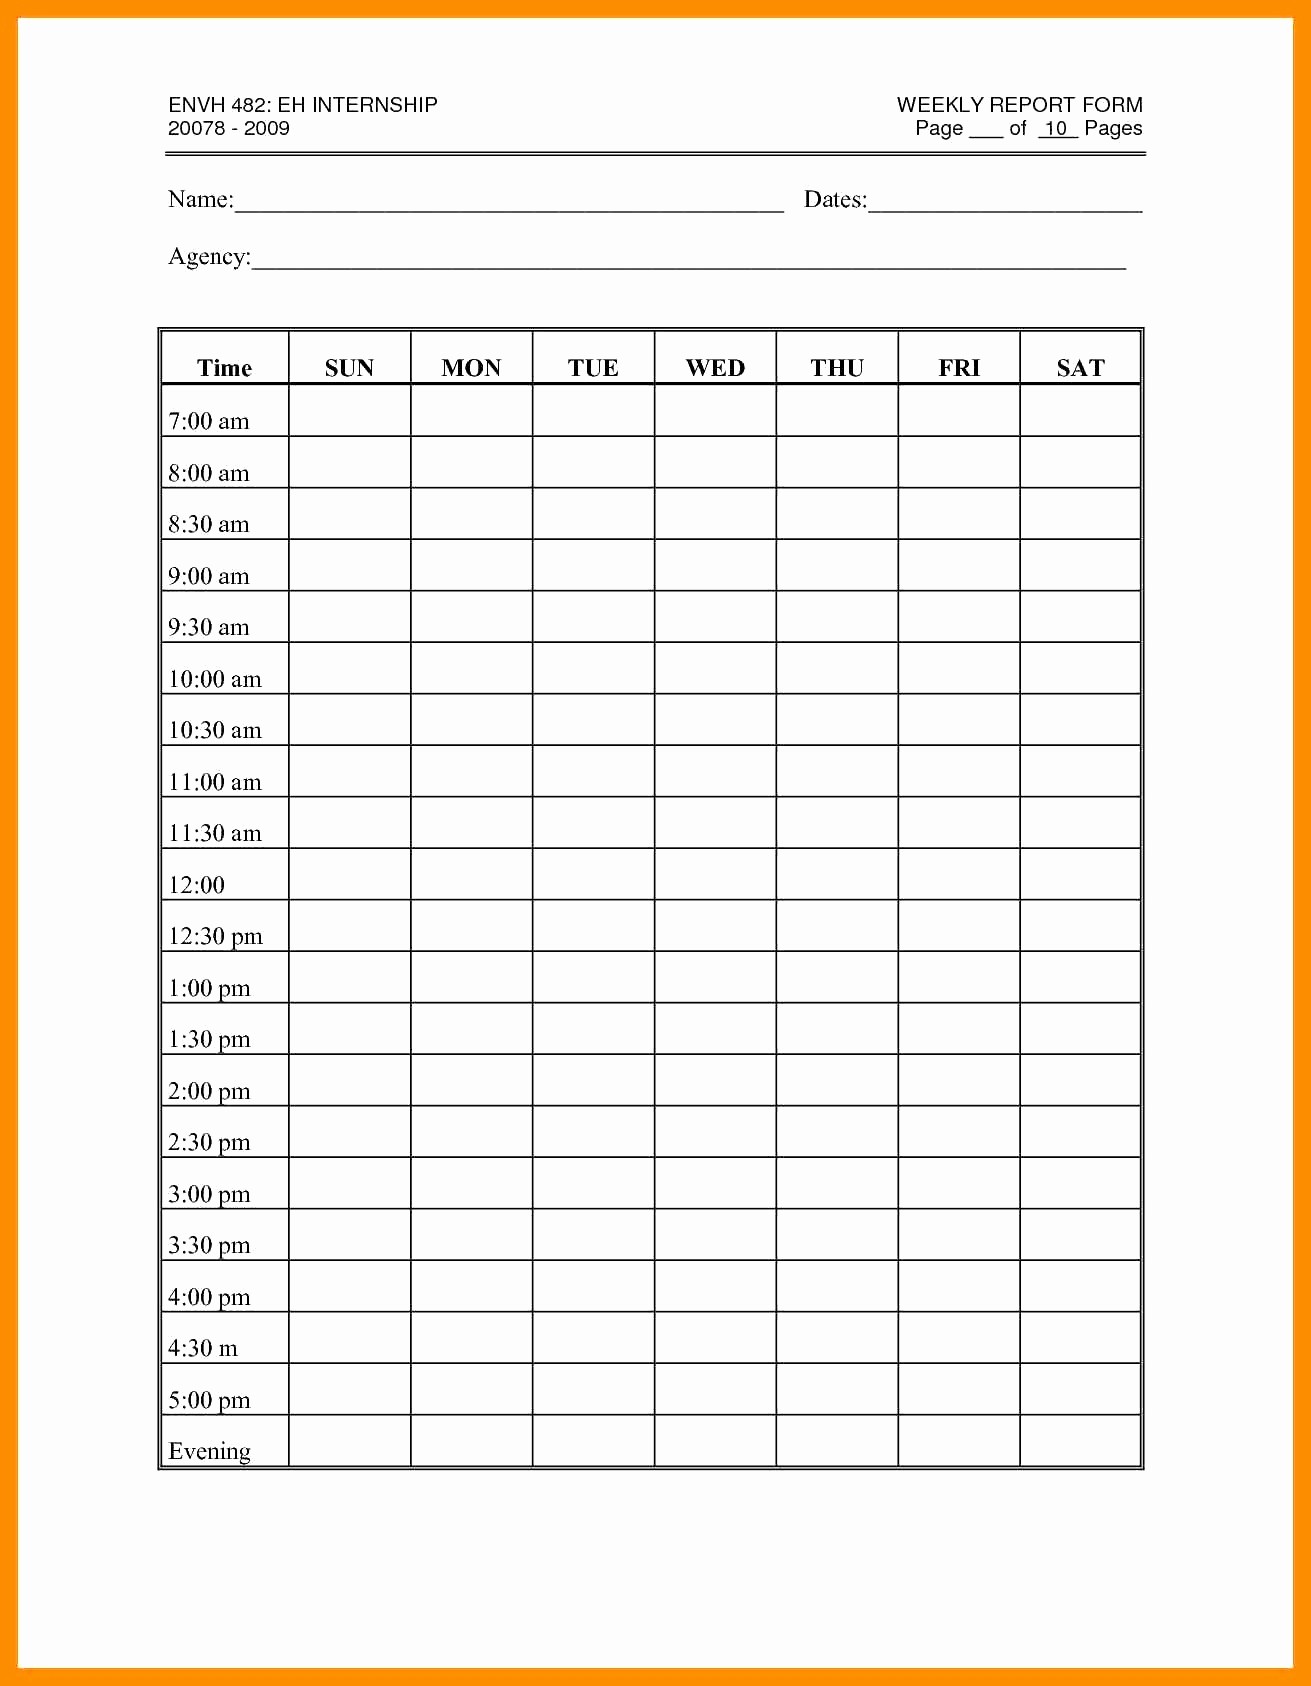 50 Lovely Work Weight Loss Challenge Spreadsheet DOCUMENTS IDEAS Document